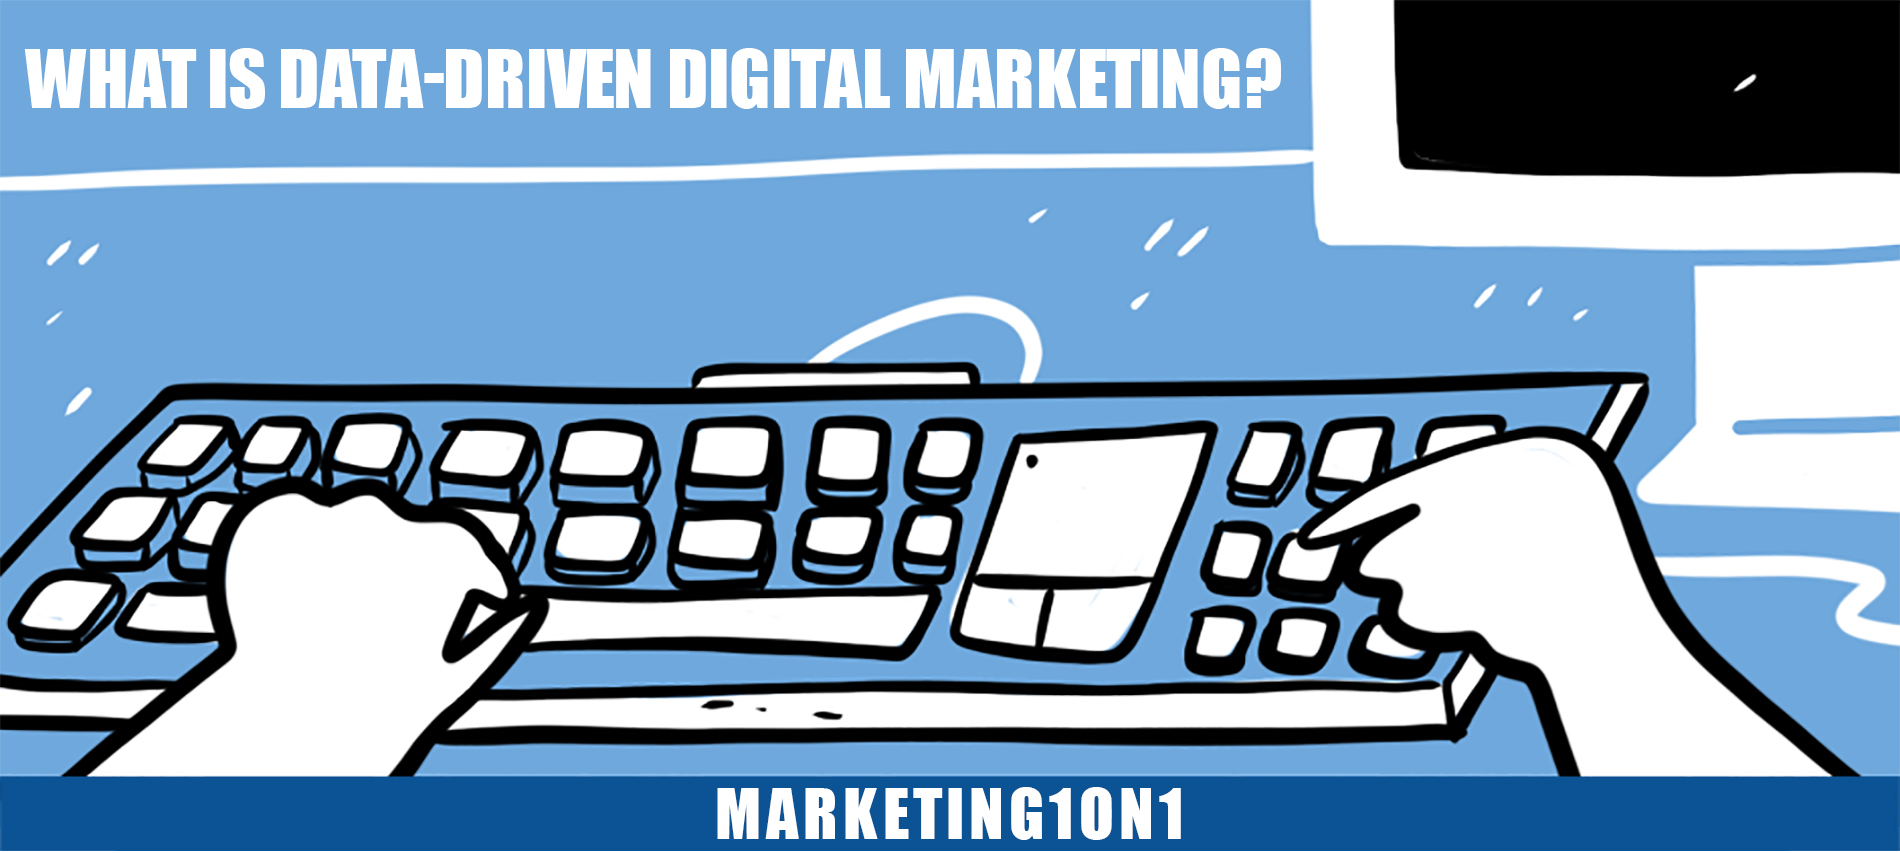 What is data-driven digital marketing?